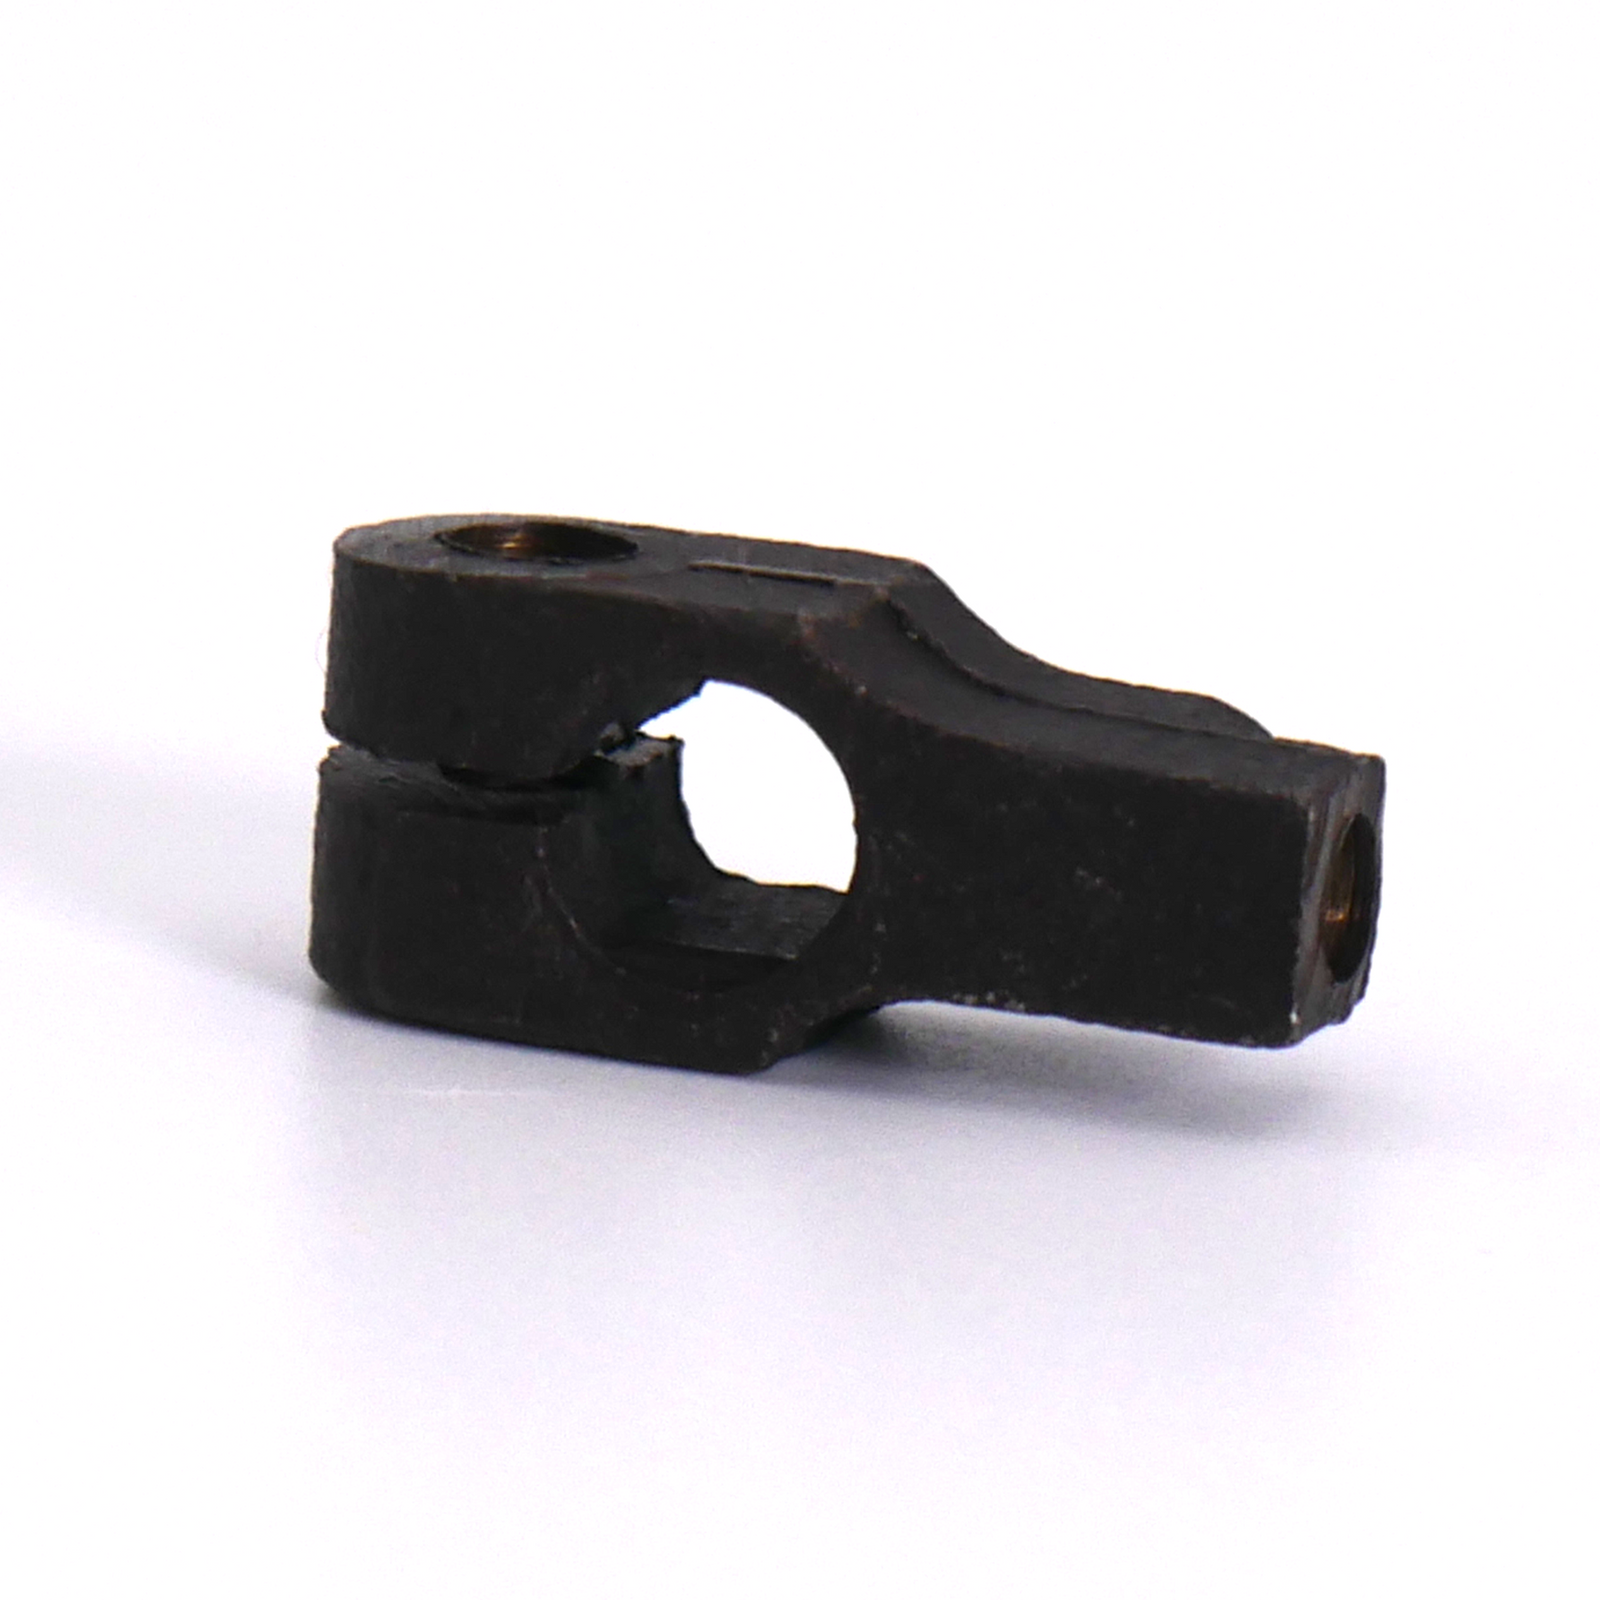 Looper rocker replacement part for industrial sewing machine